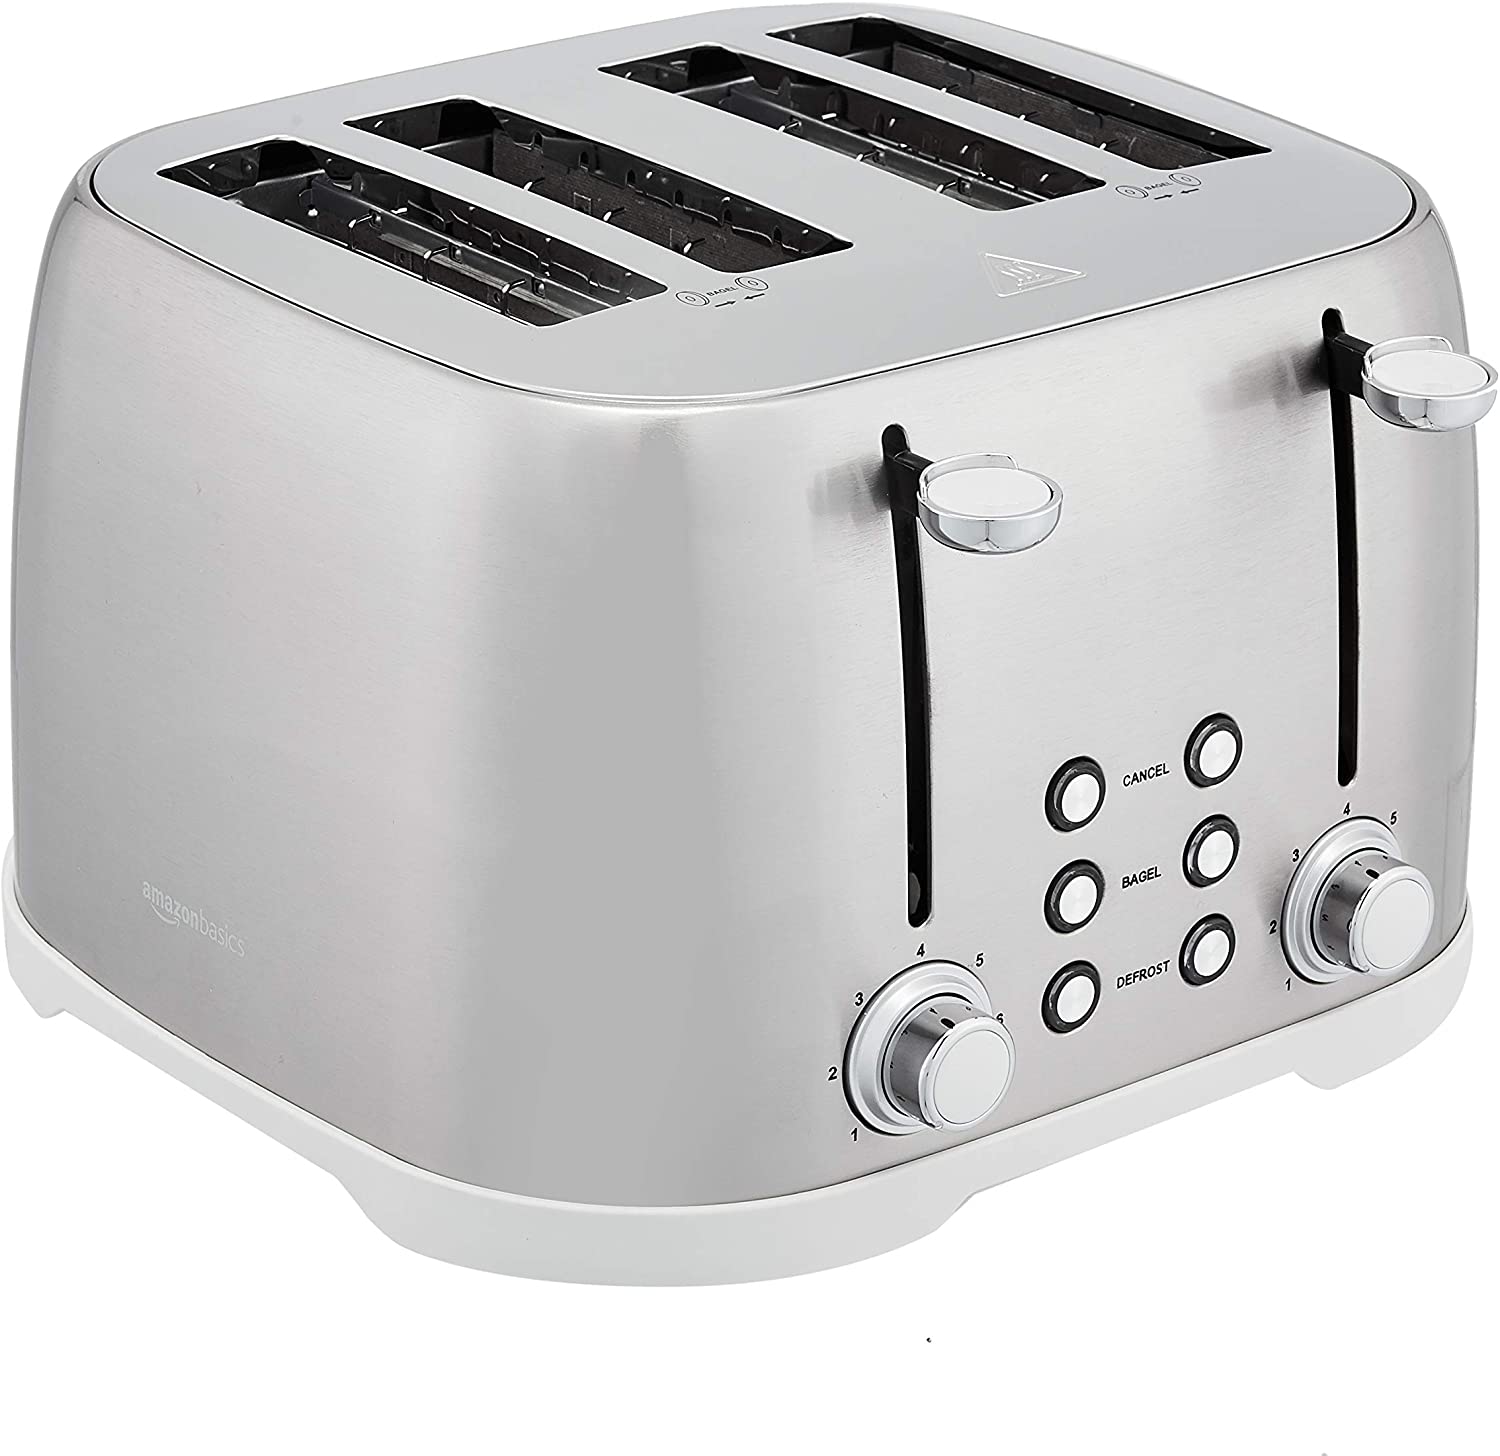 Elite Gourmet ECT-3100 Long Slot 4 Slice Toaster, Reheat, 6 Toast Settings,  Defrost, Cancel Functions, Built-in Warming Rack, Extra Wide Slots for